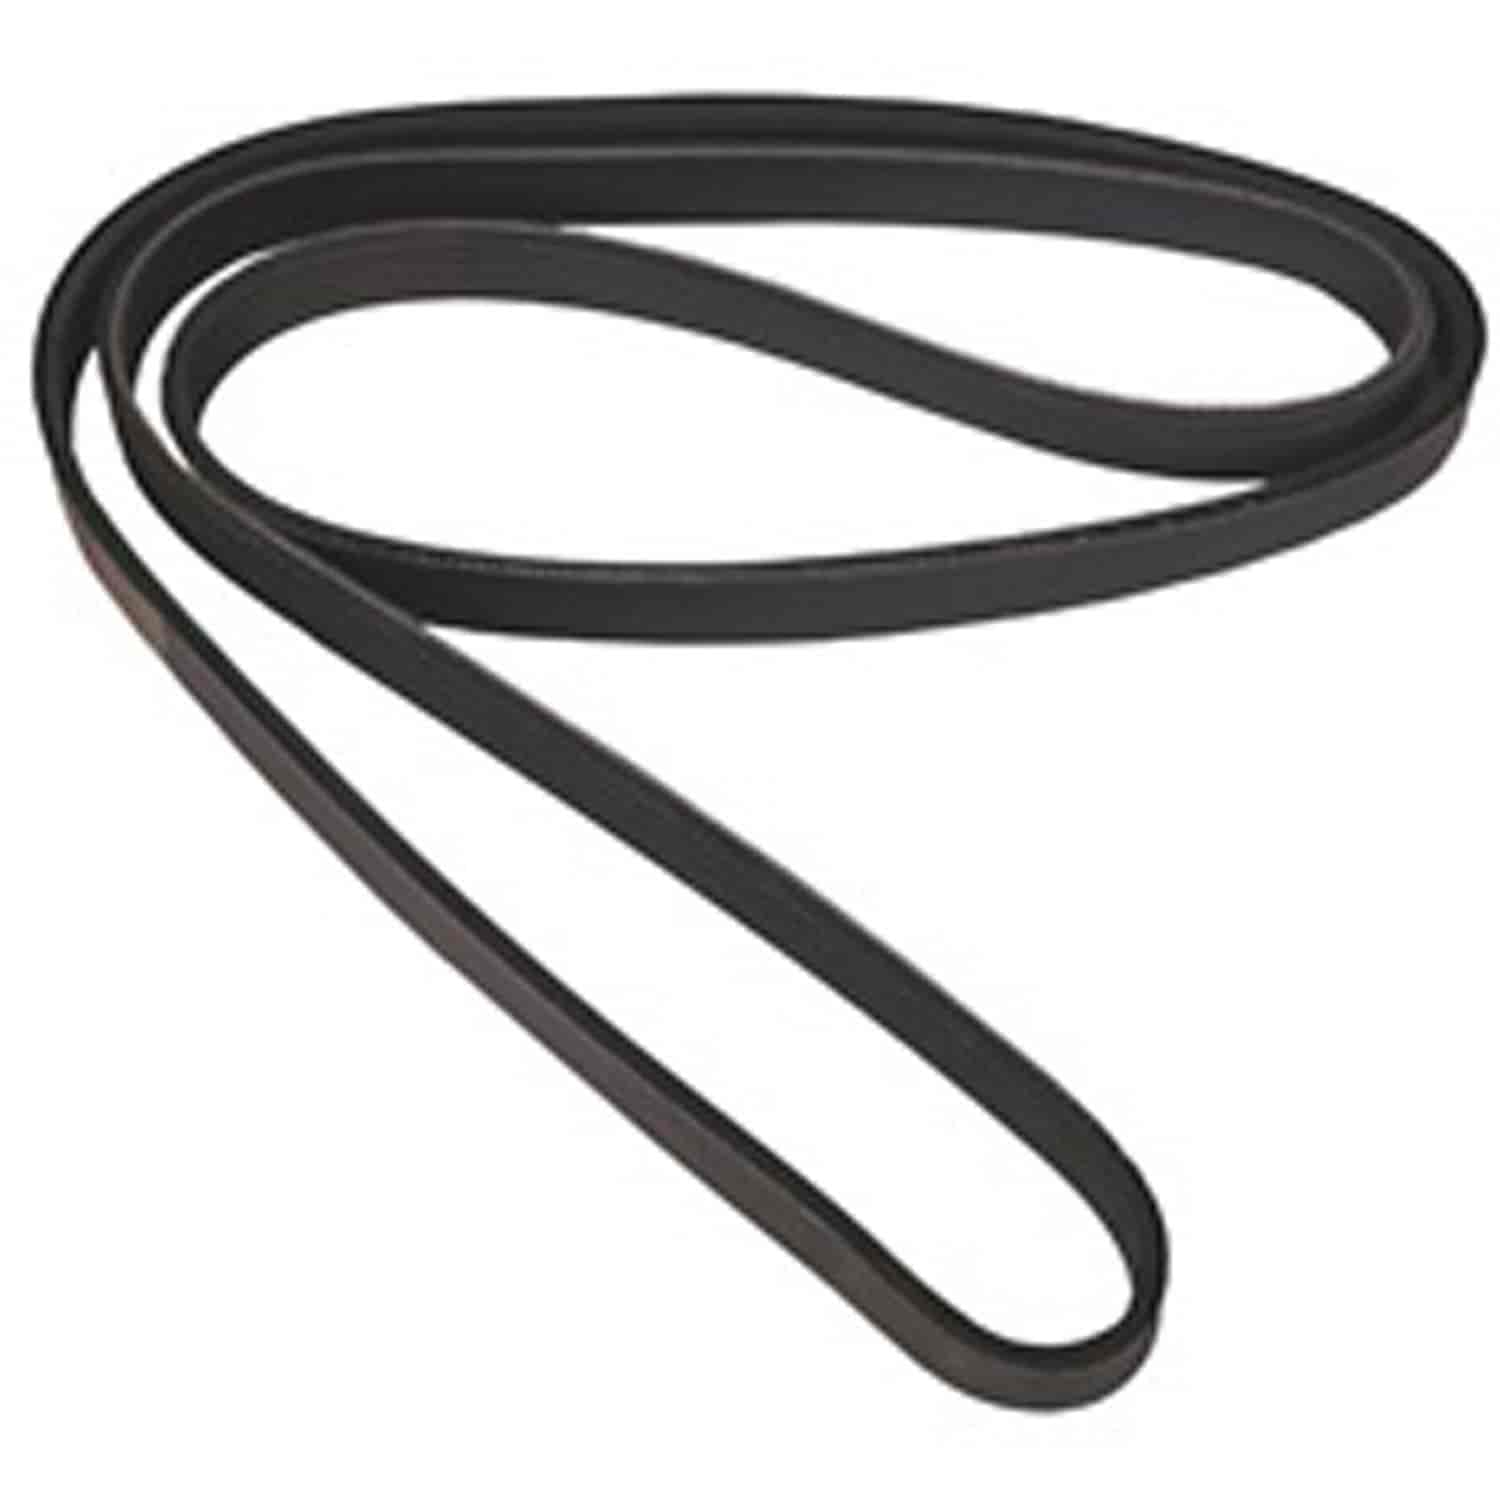 Stock replacement serpentine belt from Omix-ADA, Fits 91-95